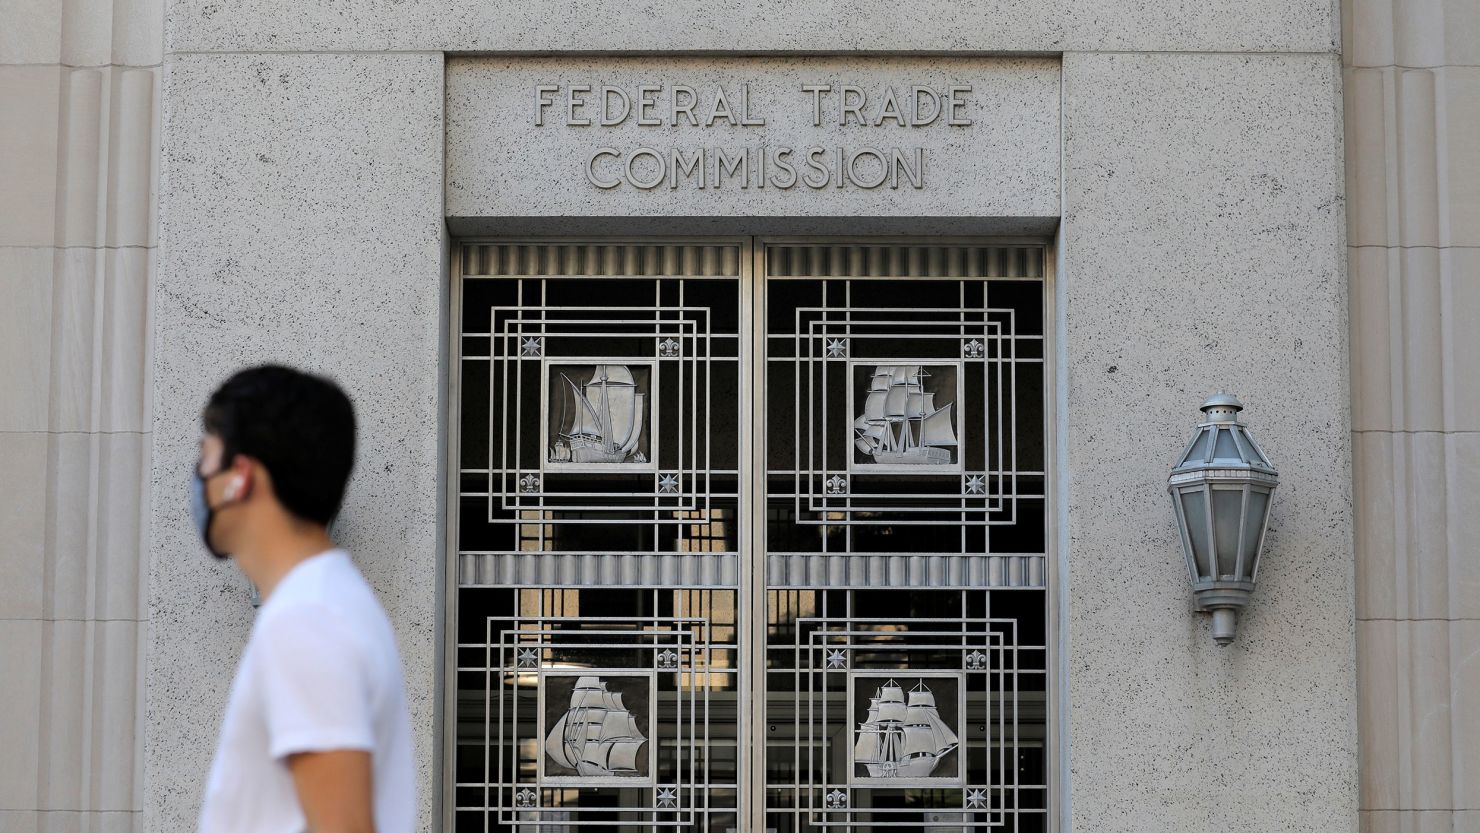 Signage is seen at the Federal Trade Commission headquarters in Washington.